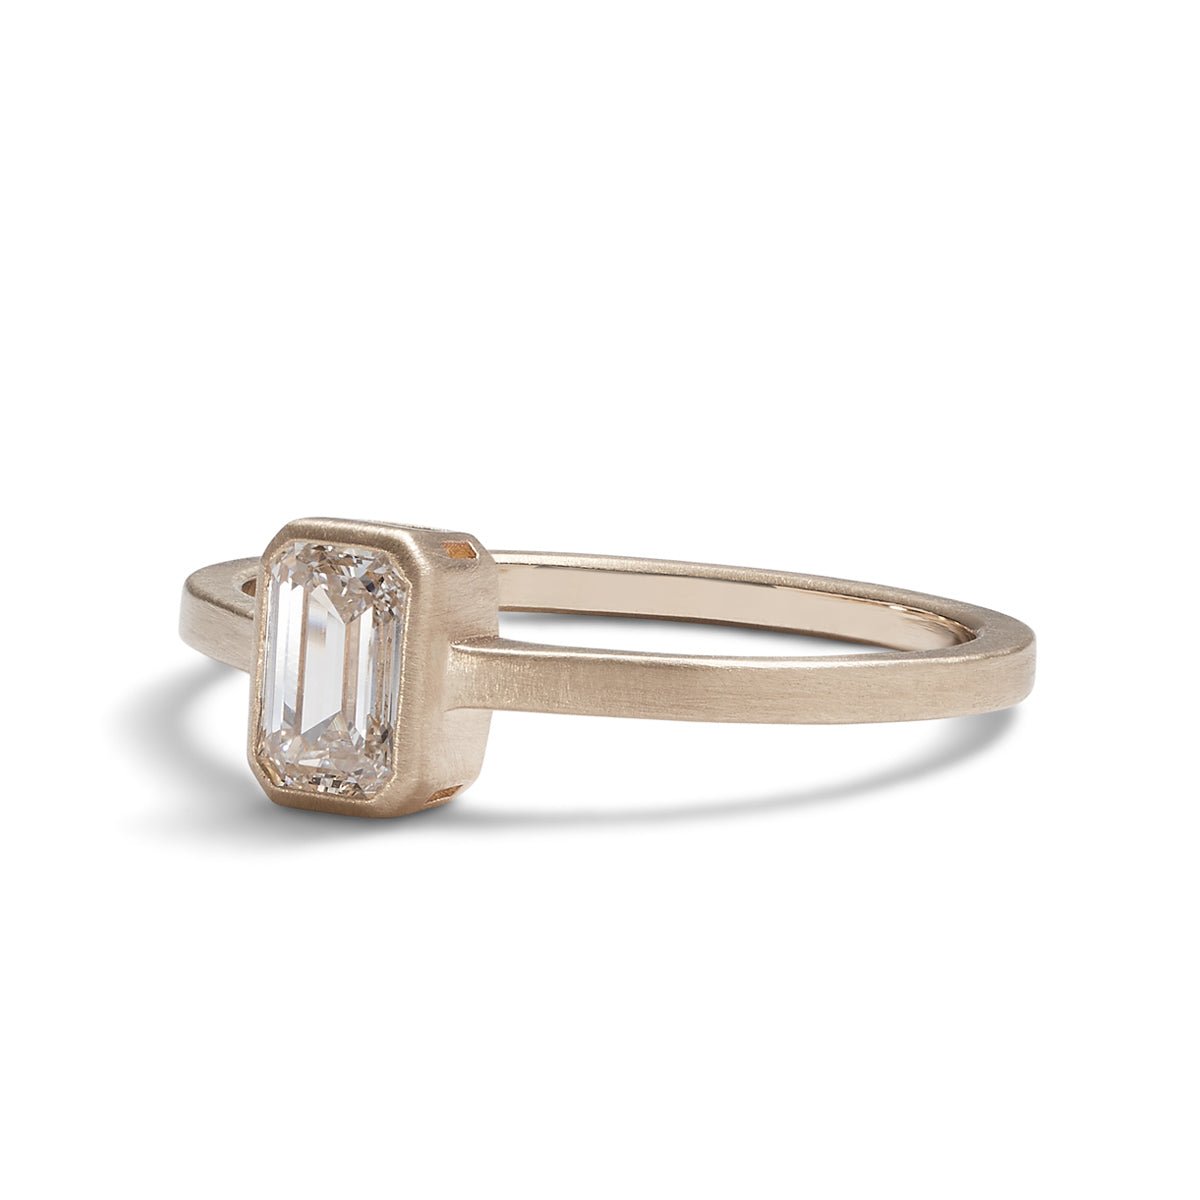 Emerald cut lab-grown diamond Honos ring (0.5 carat). Set in 14K recycled gold and made in Portland, Oregon.